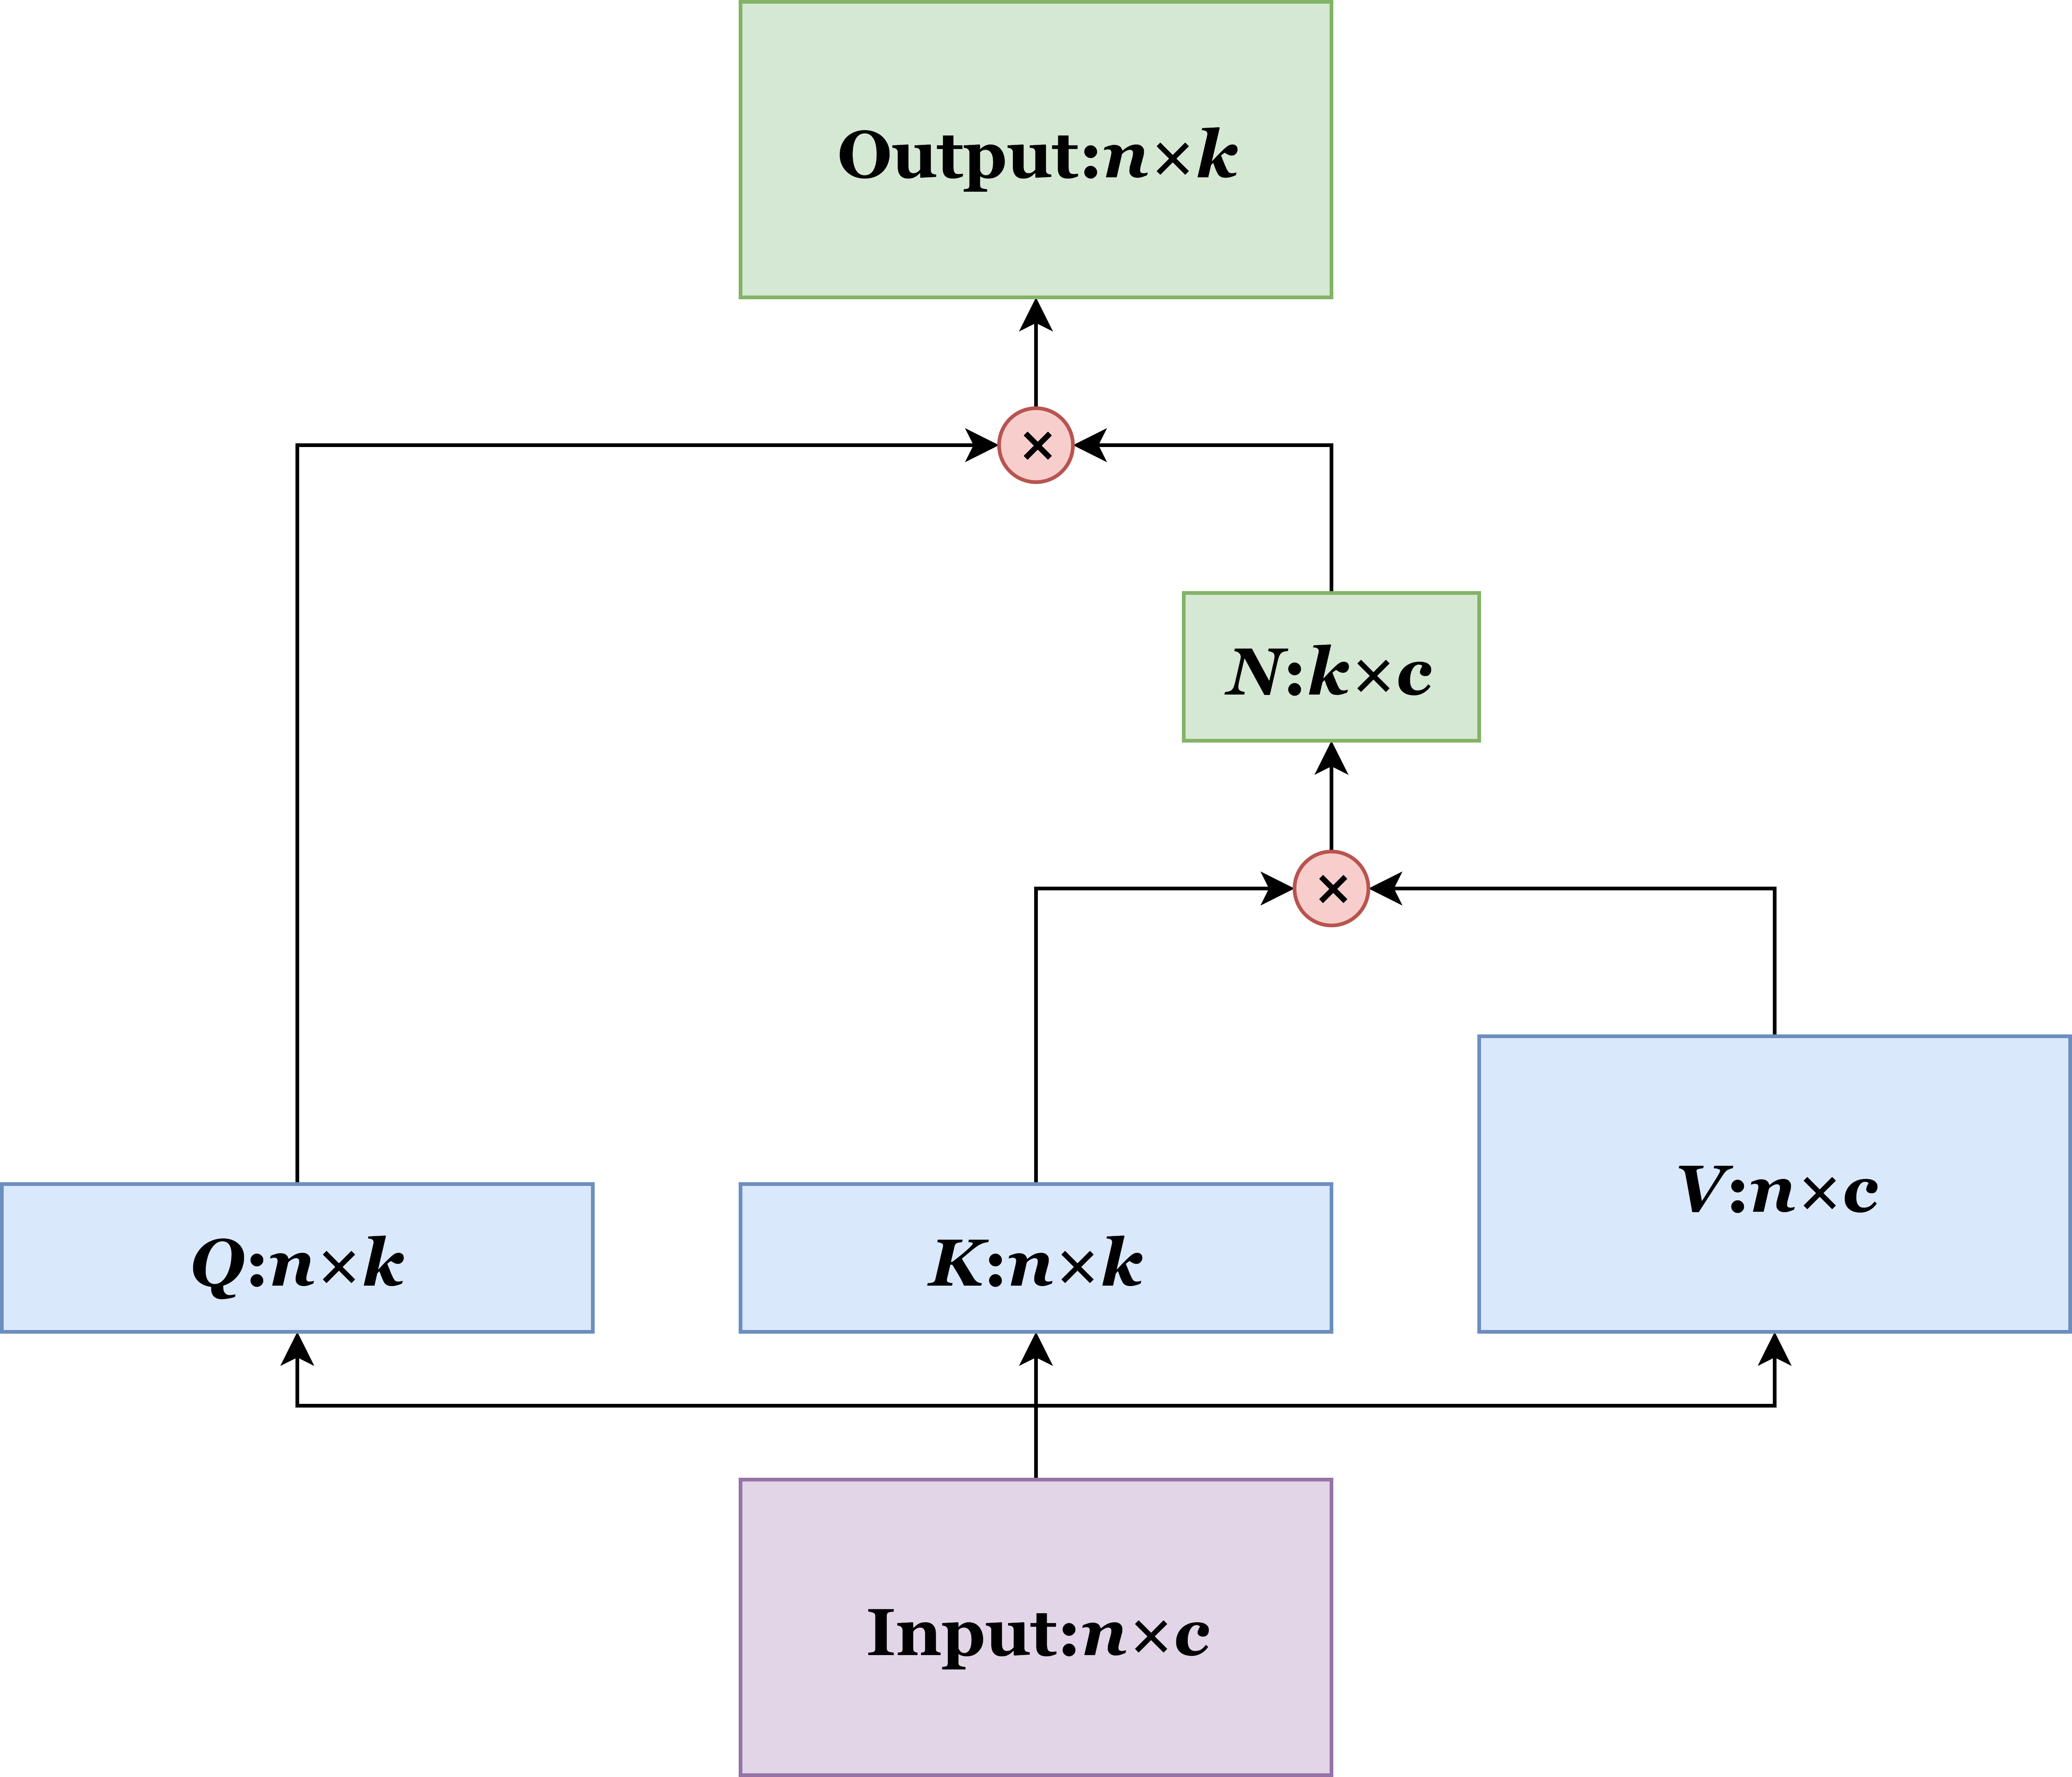 Illustration of the network architecture for efficient attention